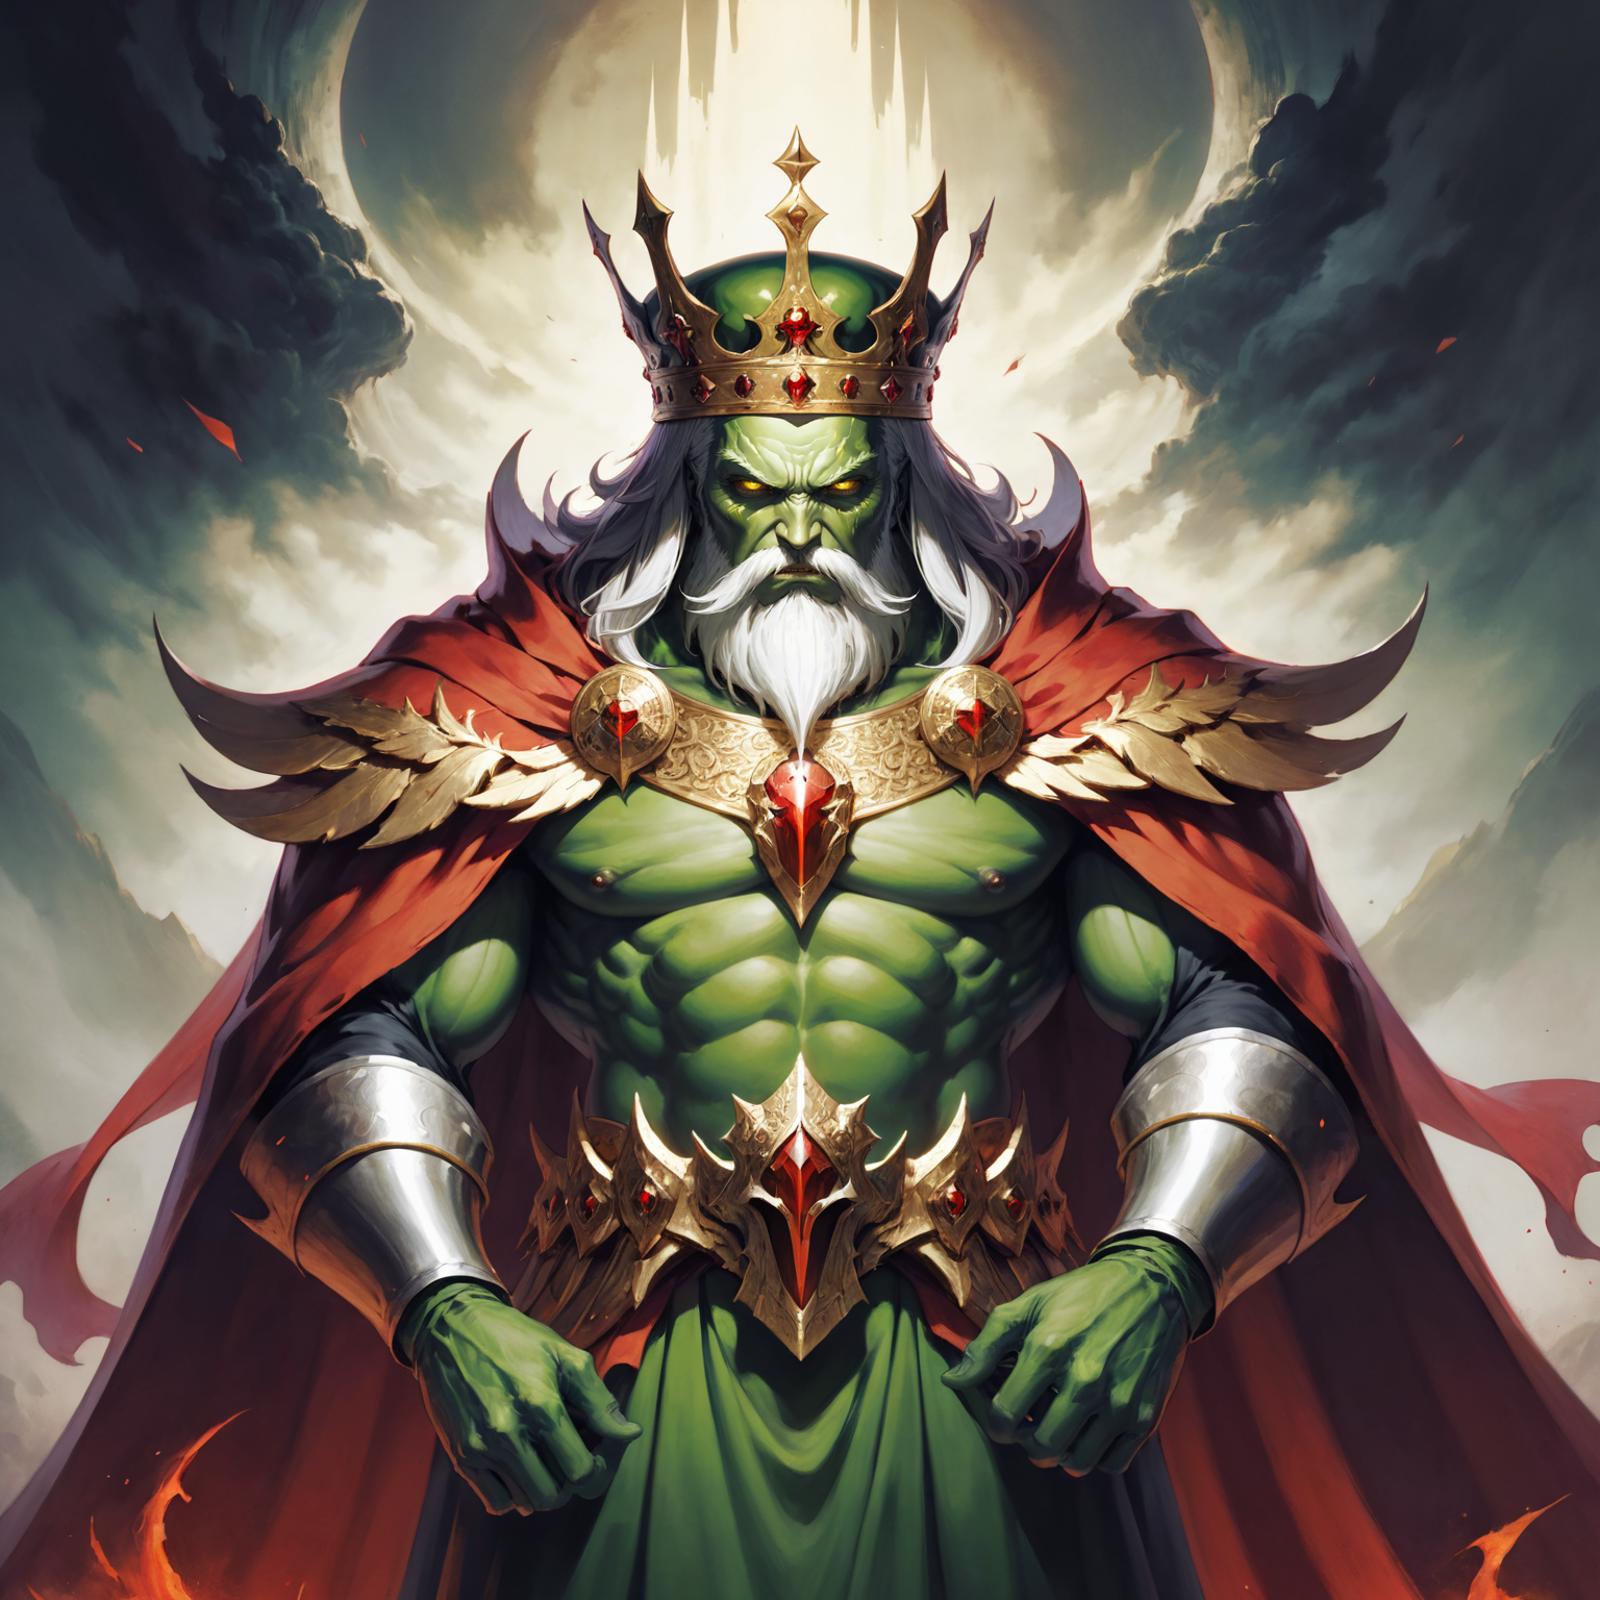 A muscular man wearing a crown and holding a scepter, with a green and red color scheme.